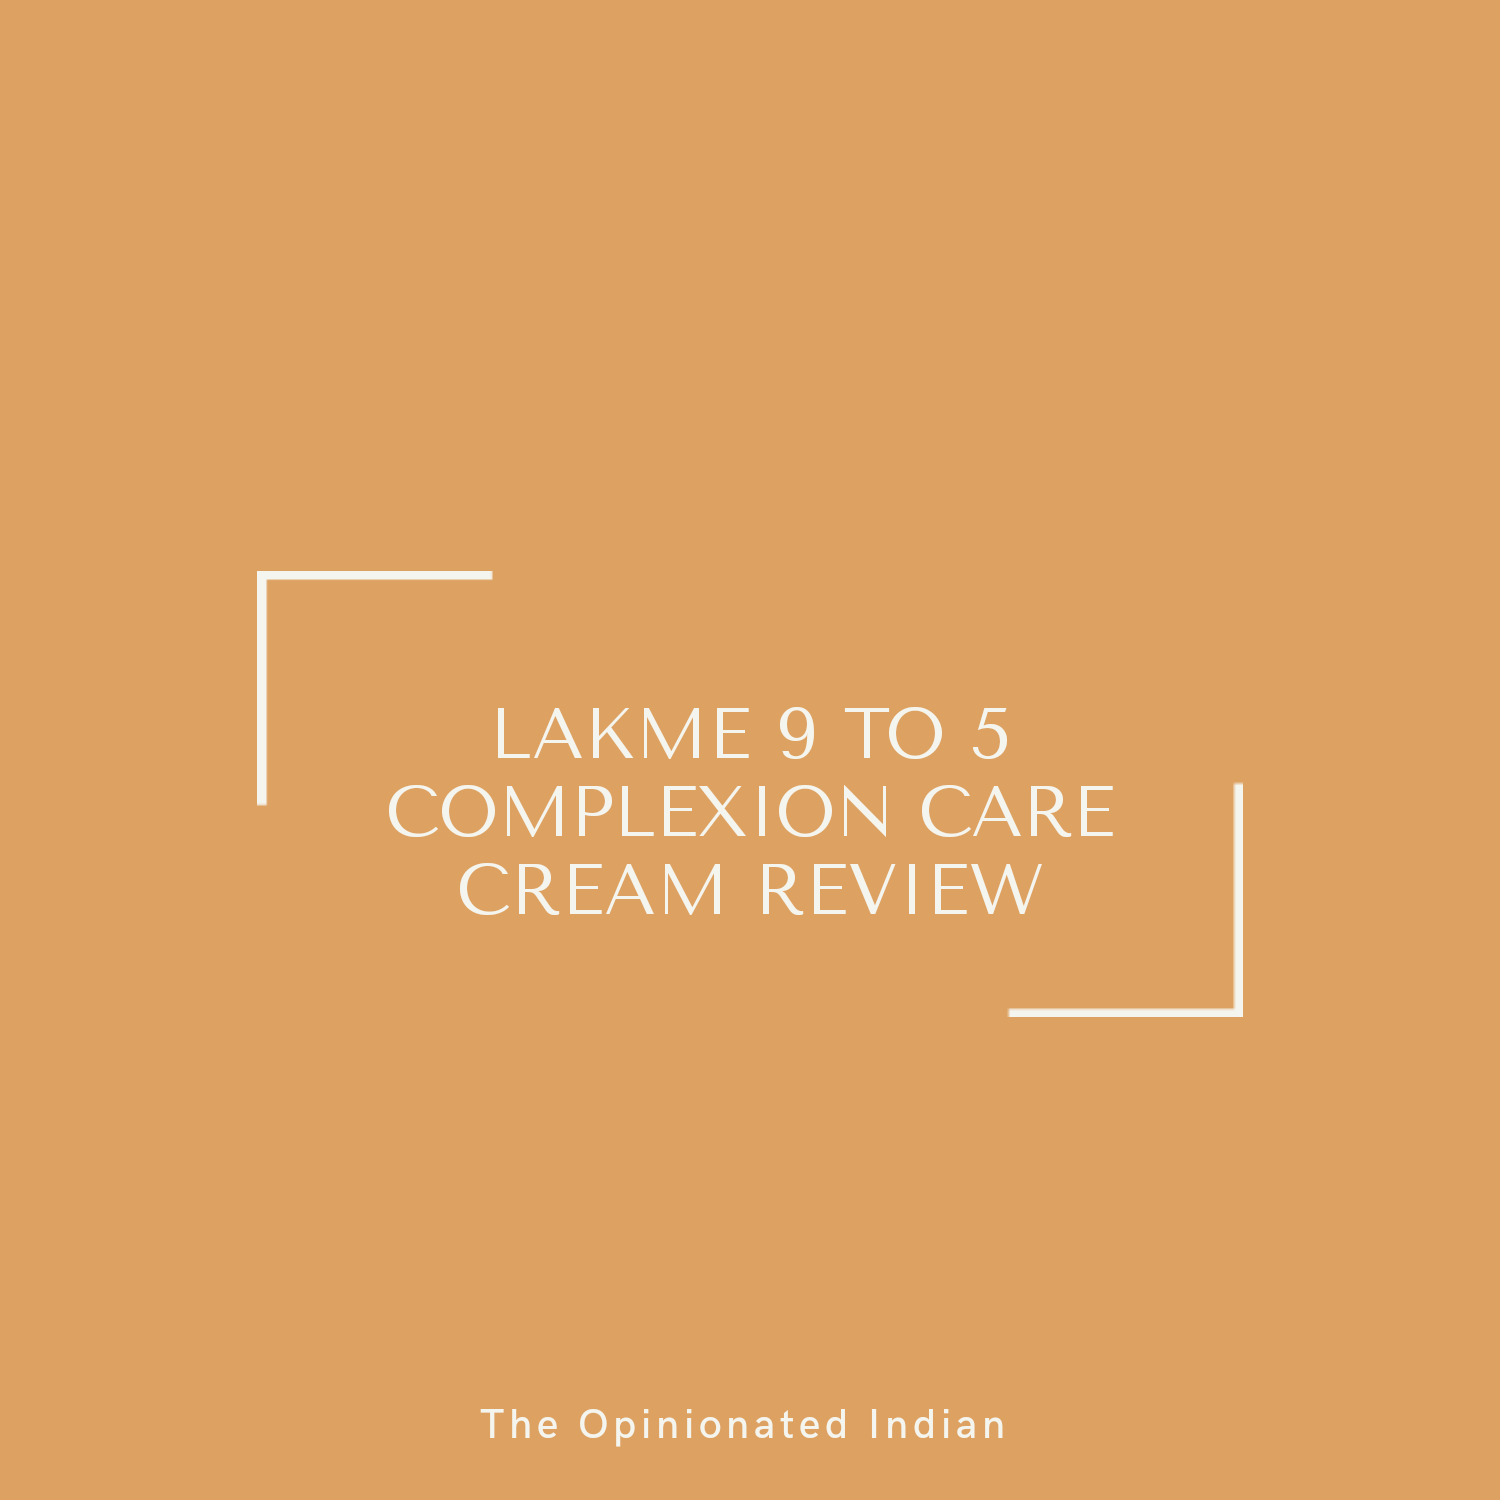 Lakme 9 to 5 Complexion Care Cream Review